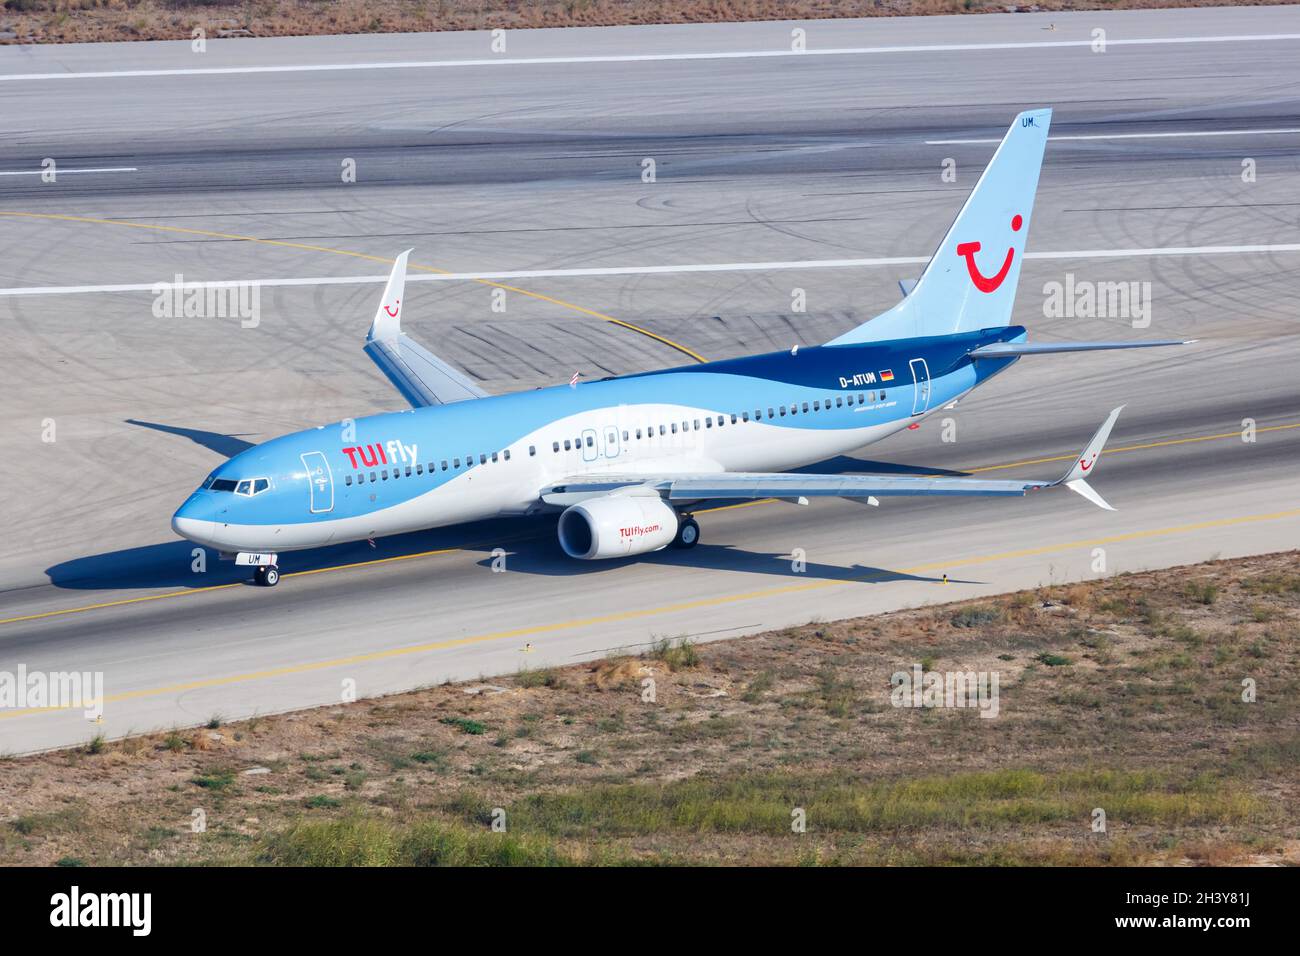 TUIfly Boeing 737-800 aircraft Rhodes Airport in Greece Stock Photo - Alamy